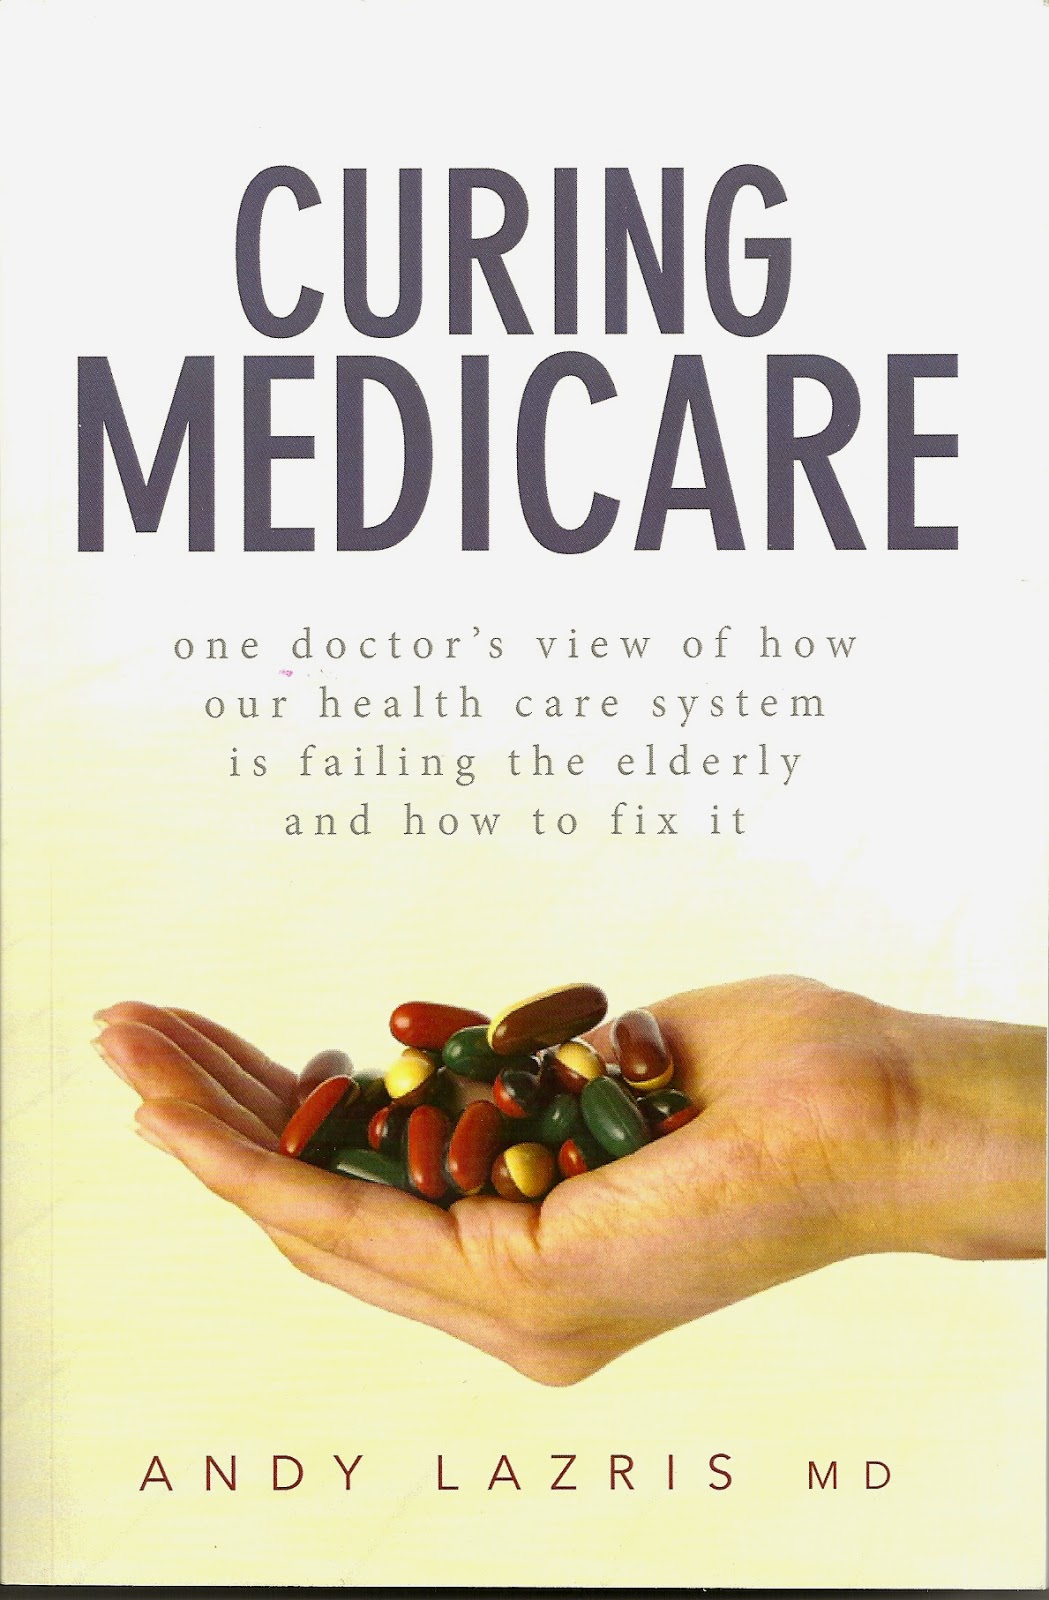  Curing Medicare: A Book Review